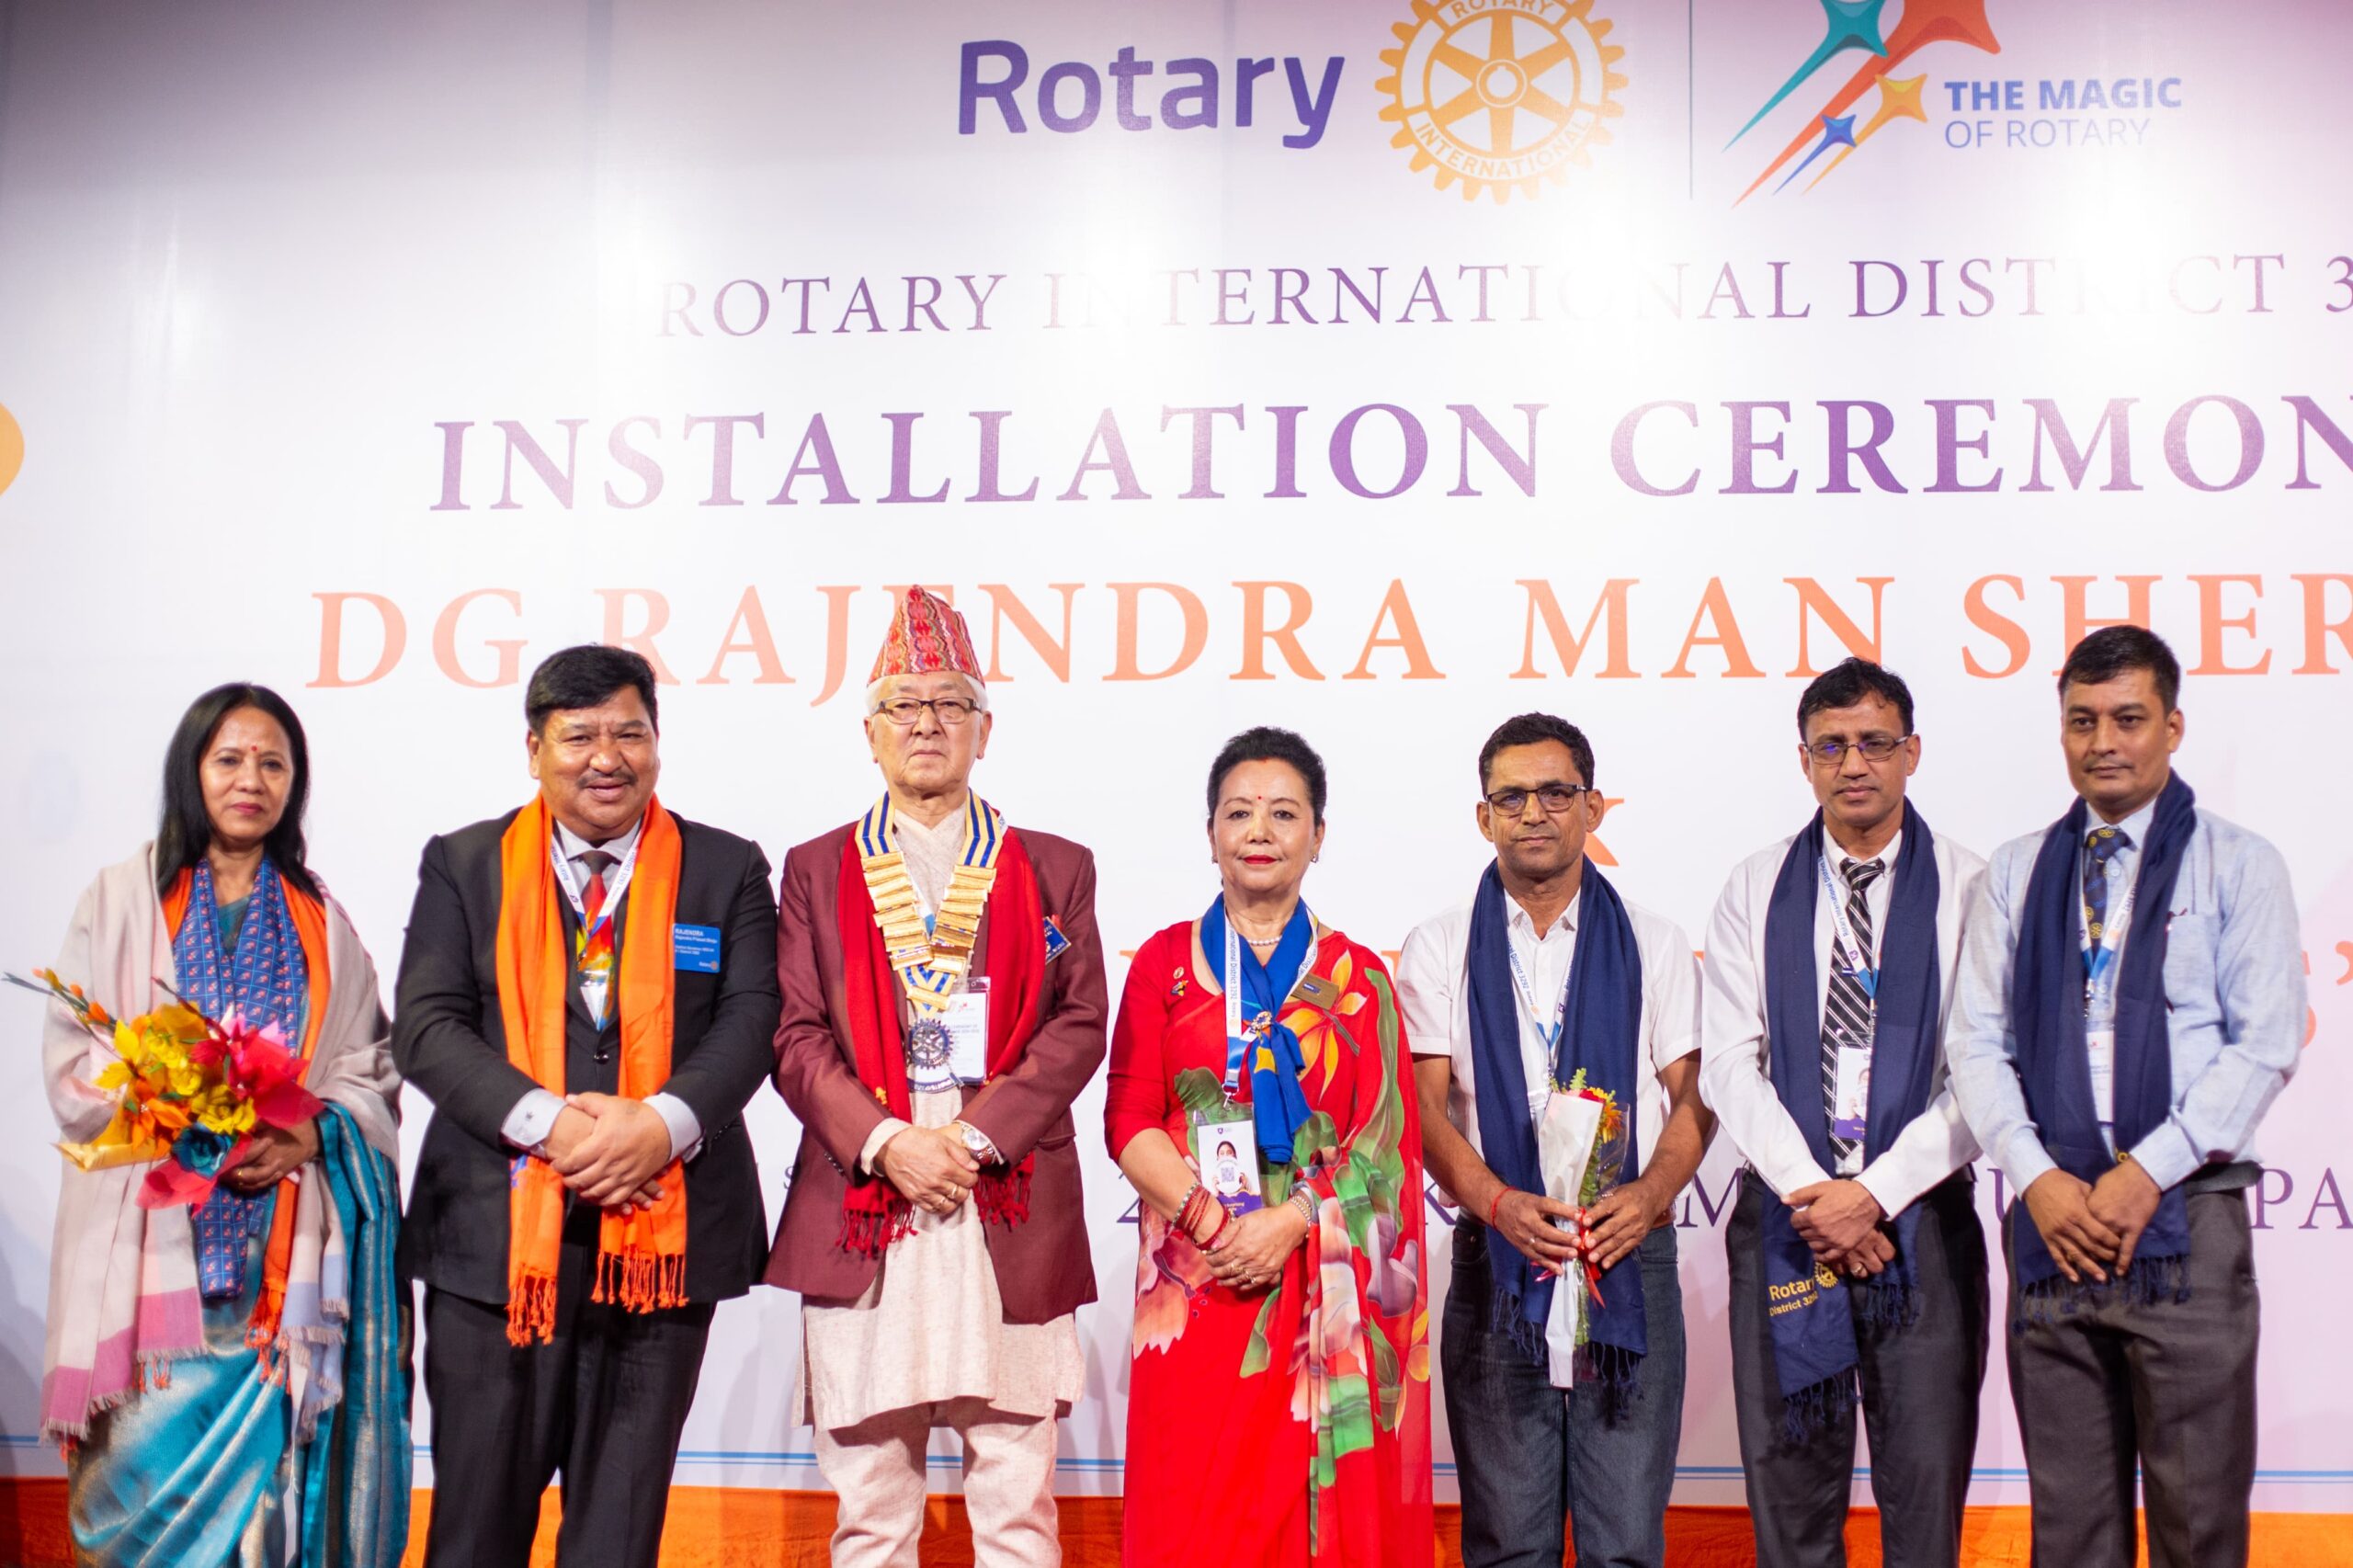 The installation ceremony of DG Rajendra Man Sherchan for Rotary International District 3292